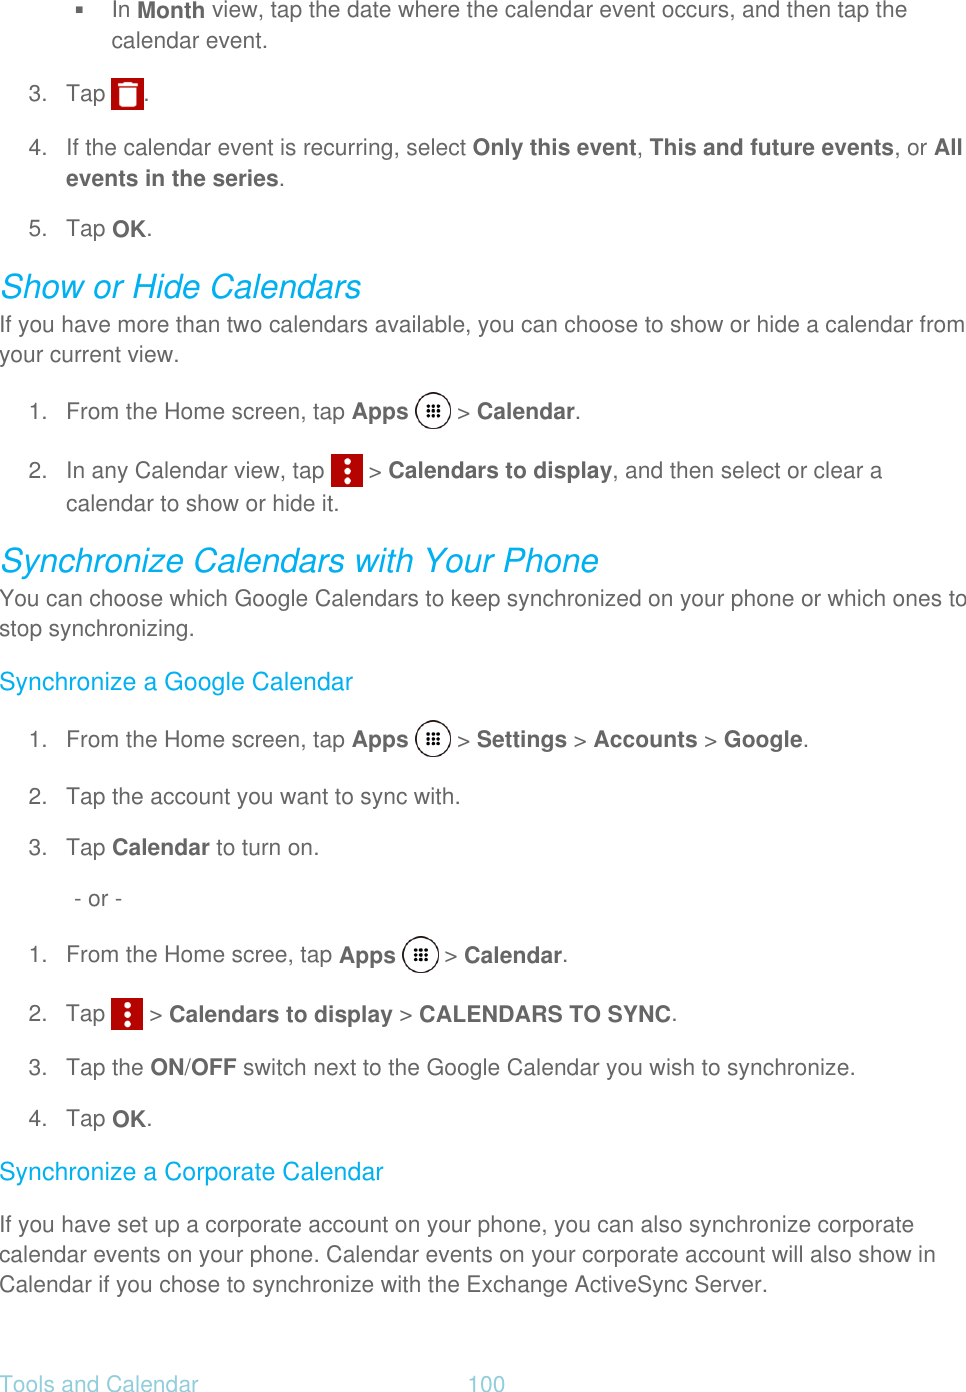 Tools and Calendar  100    In Month view, tap the date where the calendar event occurs, and then tap the calendar event. 3. Tap  . 4. If the calendar event is recurring, select Only this event, This and future events, or All events in the series. 5. Tap OK. Show or Hide Calendars If you have more than two calendars available, you can choose to show or hide a calendar from your current view. 1.  From the Home screen, tap Apps   &gt; Calendar. 2.  In any Calendar view, tap   &gt; Calendars to display, and then select or clear a calendar to show or hide it. Synchronize Calendars with Your Phone You can choose which Google Calendars to keep synchronized on your phone or which ones to stop synchronizing. Synchronize a Google Calendar 1.  From the Home screen, tap Apps   &gt; Settings &gt; Accounts &gt; Google. 2.  Tap the account you want to sync with. 3. Tap Calendar to turn on. - or - 1.  From the Home scree, tap Apps   &gt; Calendar. 2.  Tap   &gt; Calendars to display &gt; CALENDARS TO SYNC. 3. Tap the ON/OFF switch next to the Google Calendar you wish to synchronize. 4. Tap OK. Synchronize a Corporate Calendar If you have set up a corporate account on your phone, you can also synchronize corporate calendar events on your phone. Calendar events on your corporate account will also show in Calendar if you chose to synchronize with the Exchange ActiveSync Server. 